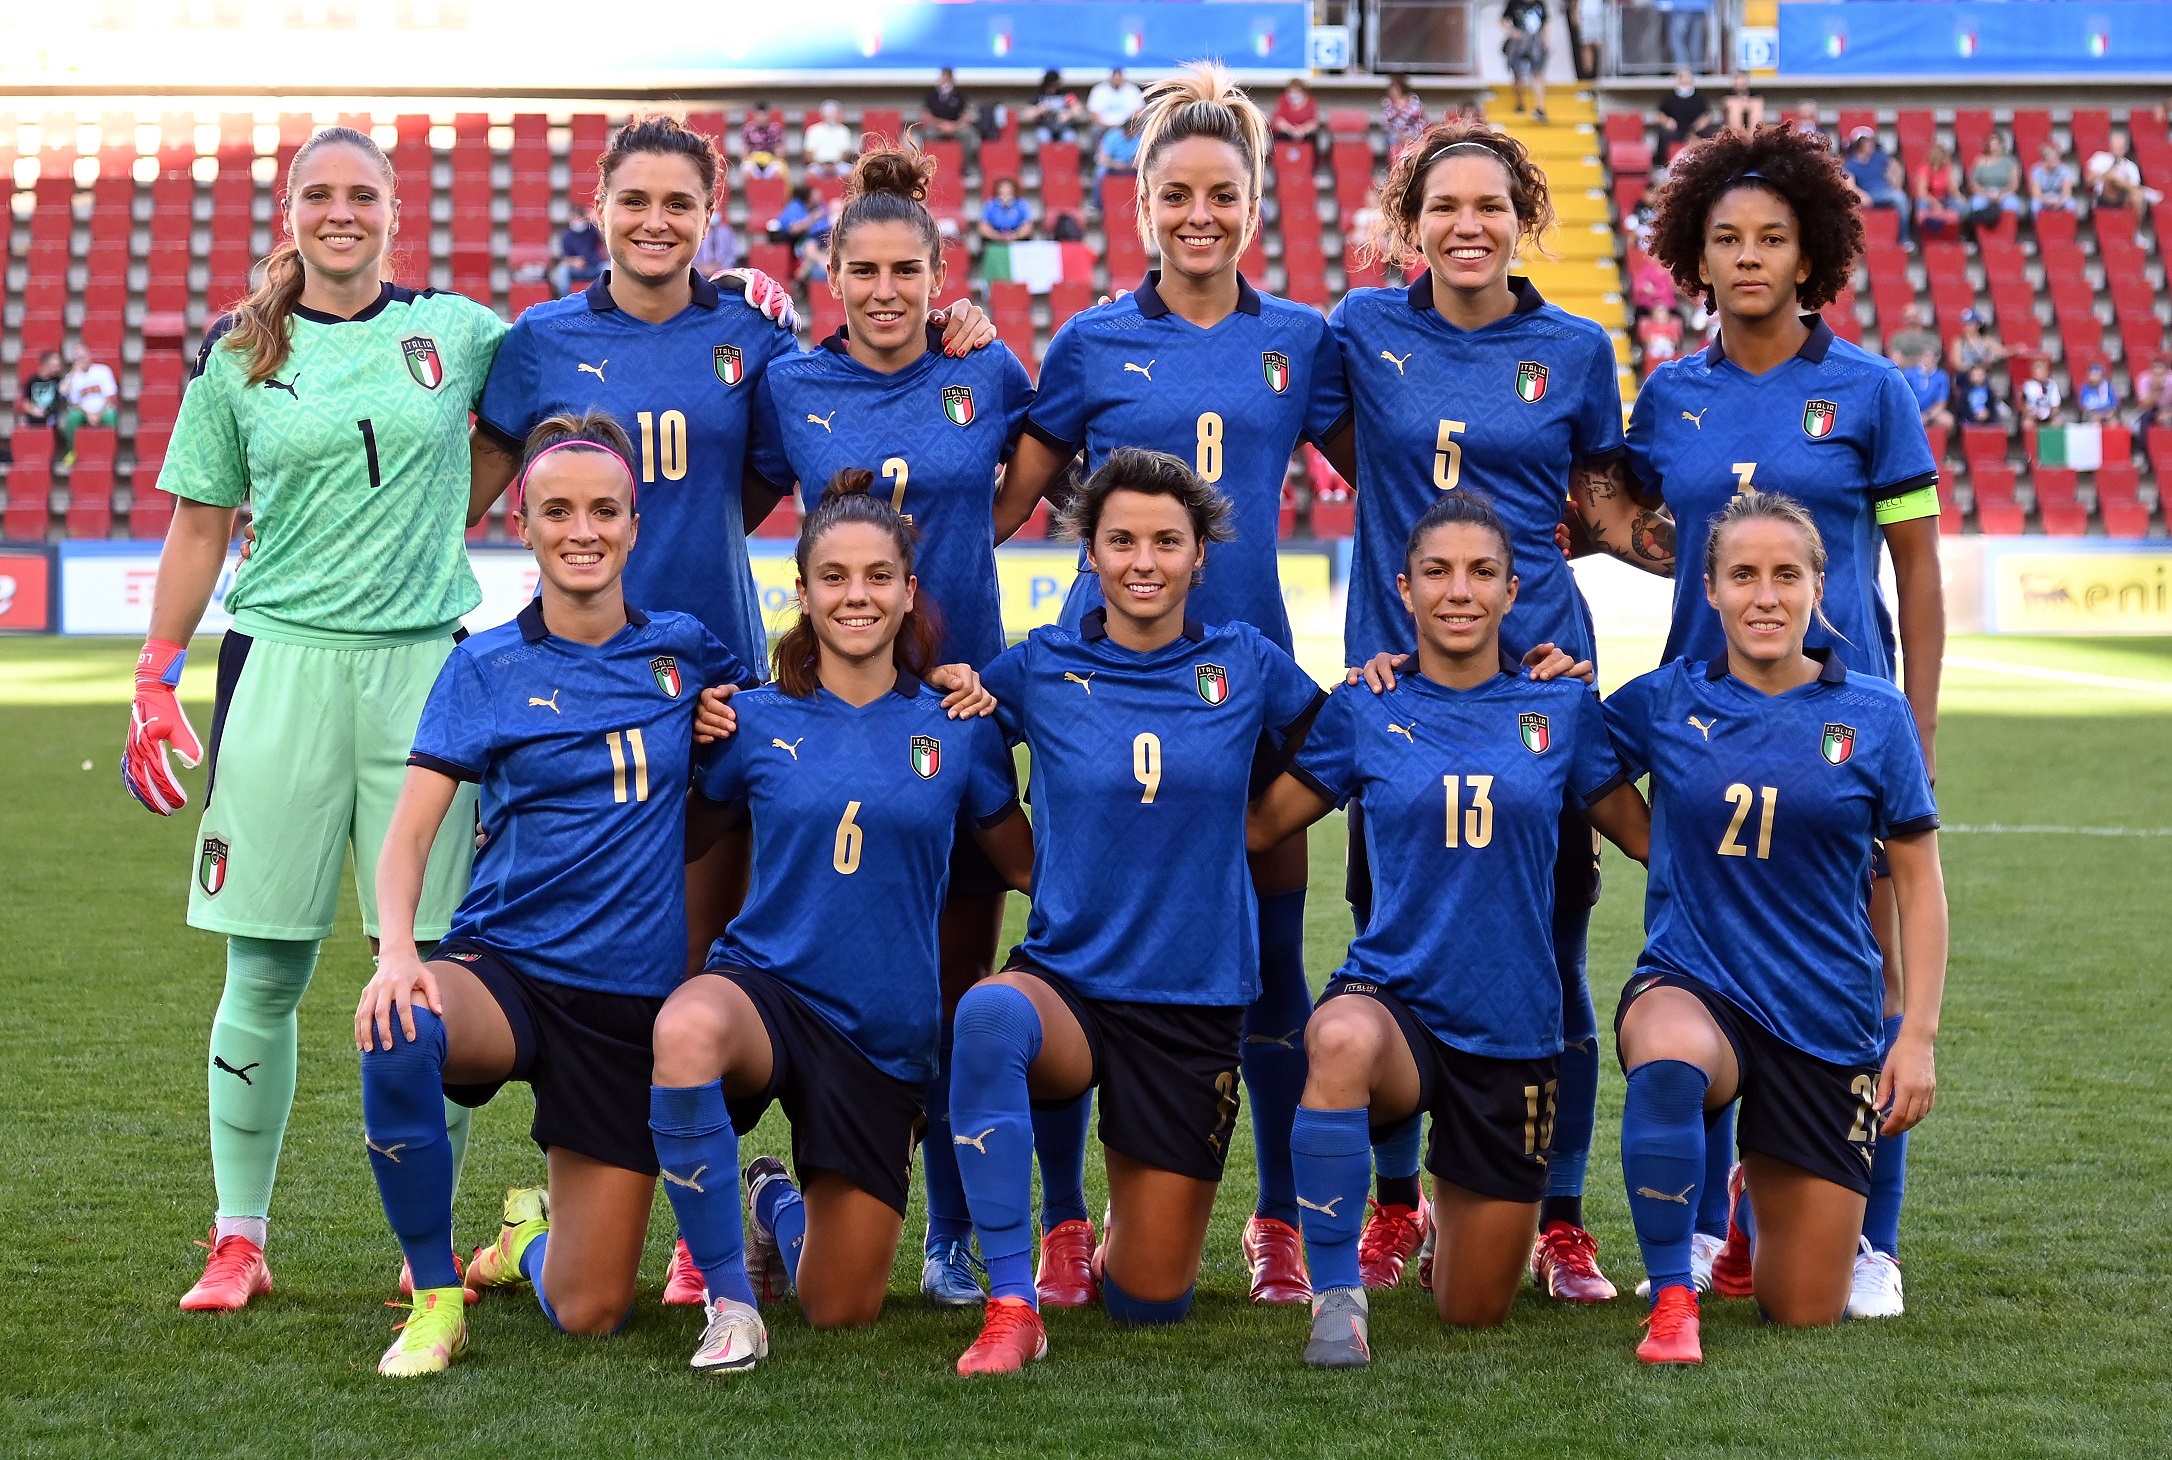 The Azzurri colours are coming to Sicily: Palermo and Catania set to host  four games involving the National Team, the Under-21s and Italy Women